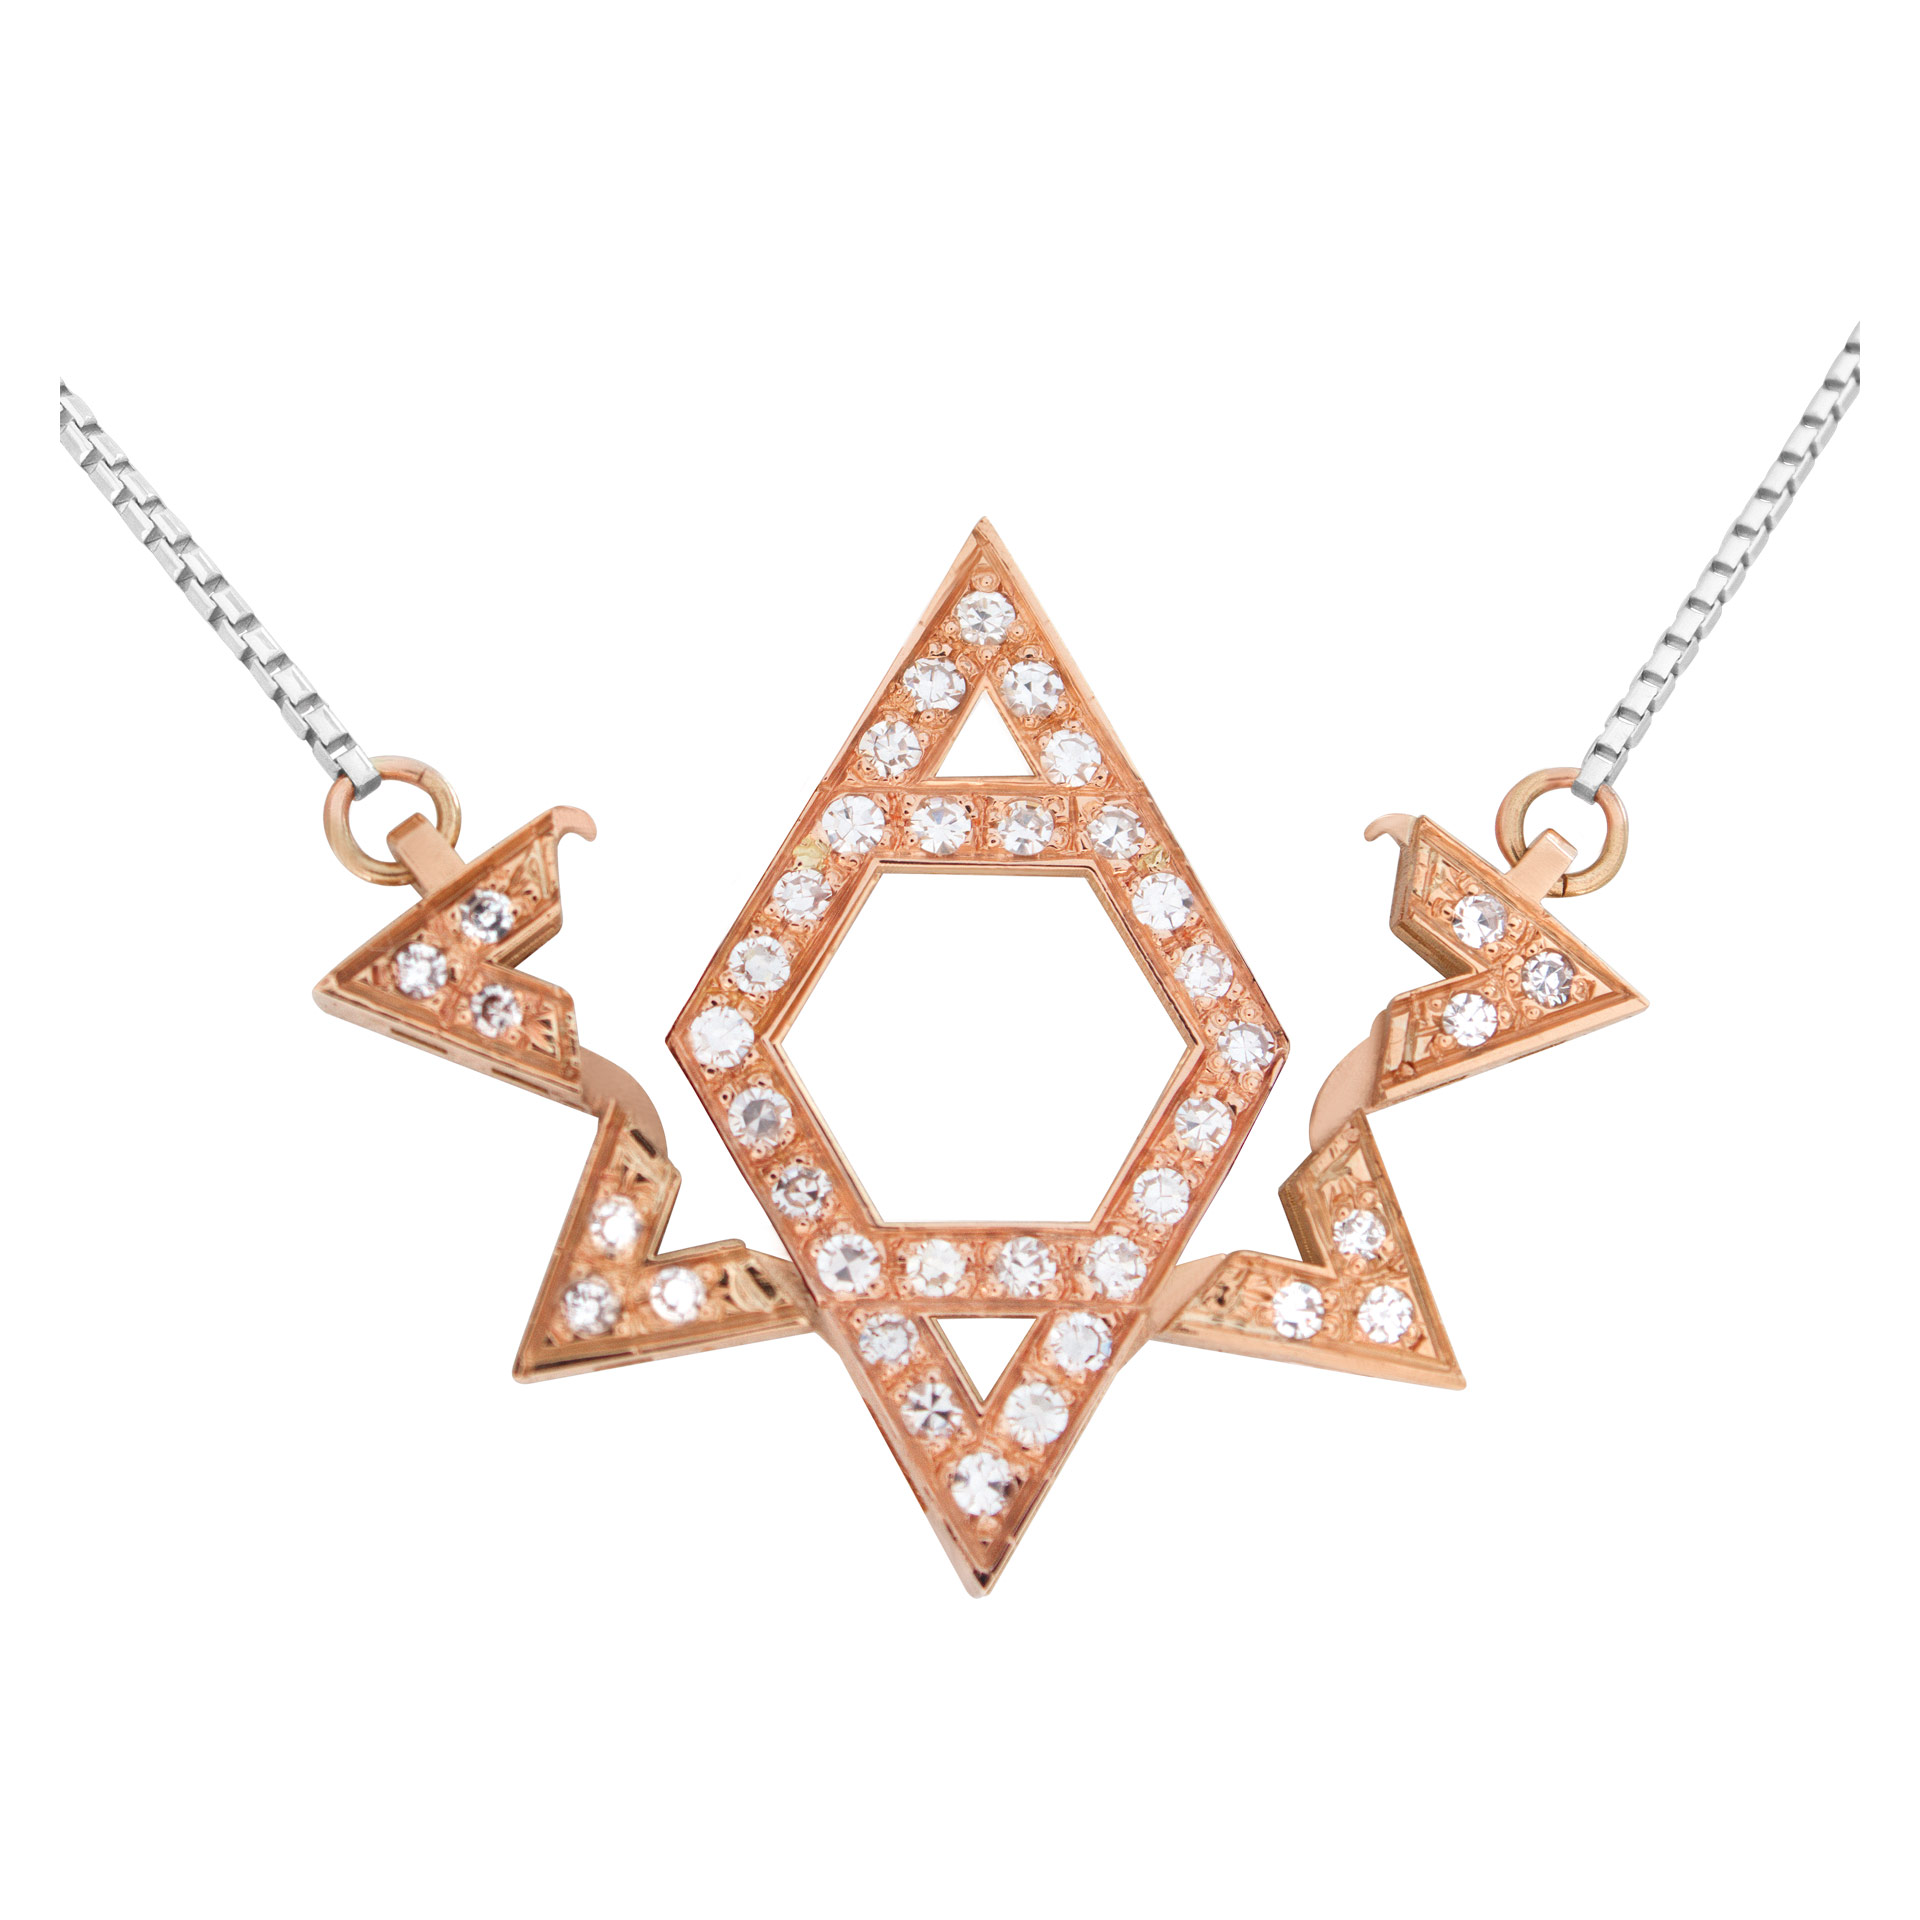 "Star of David" pendant with approximately 0.75 carat pave diamonds set in 18k rose gold with an 18k white gold chain (Stones) image 4